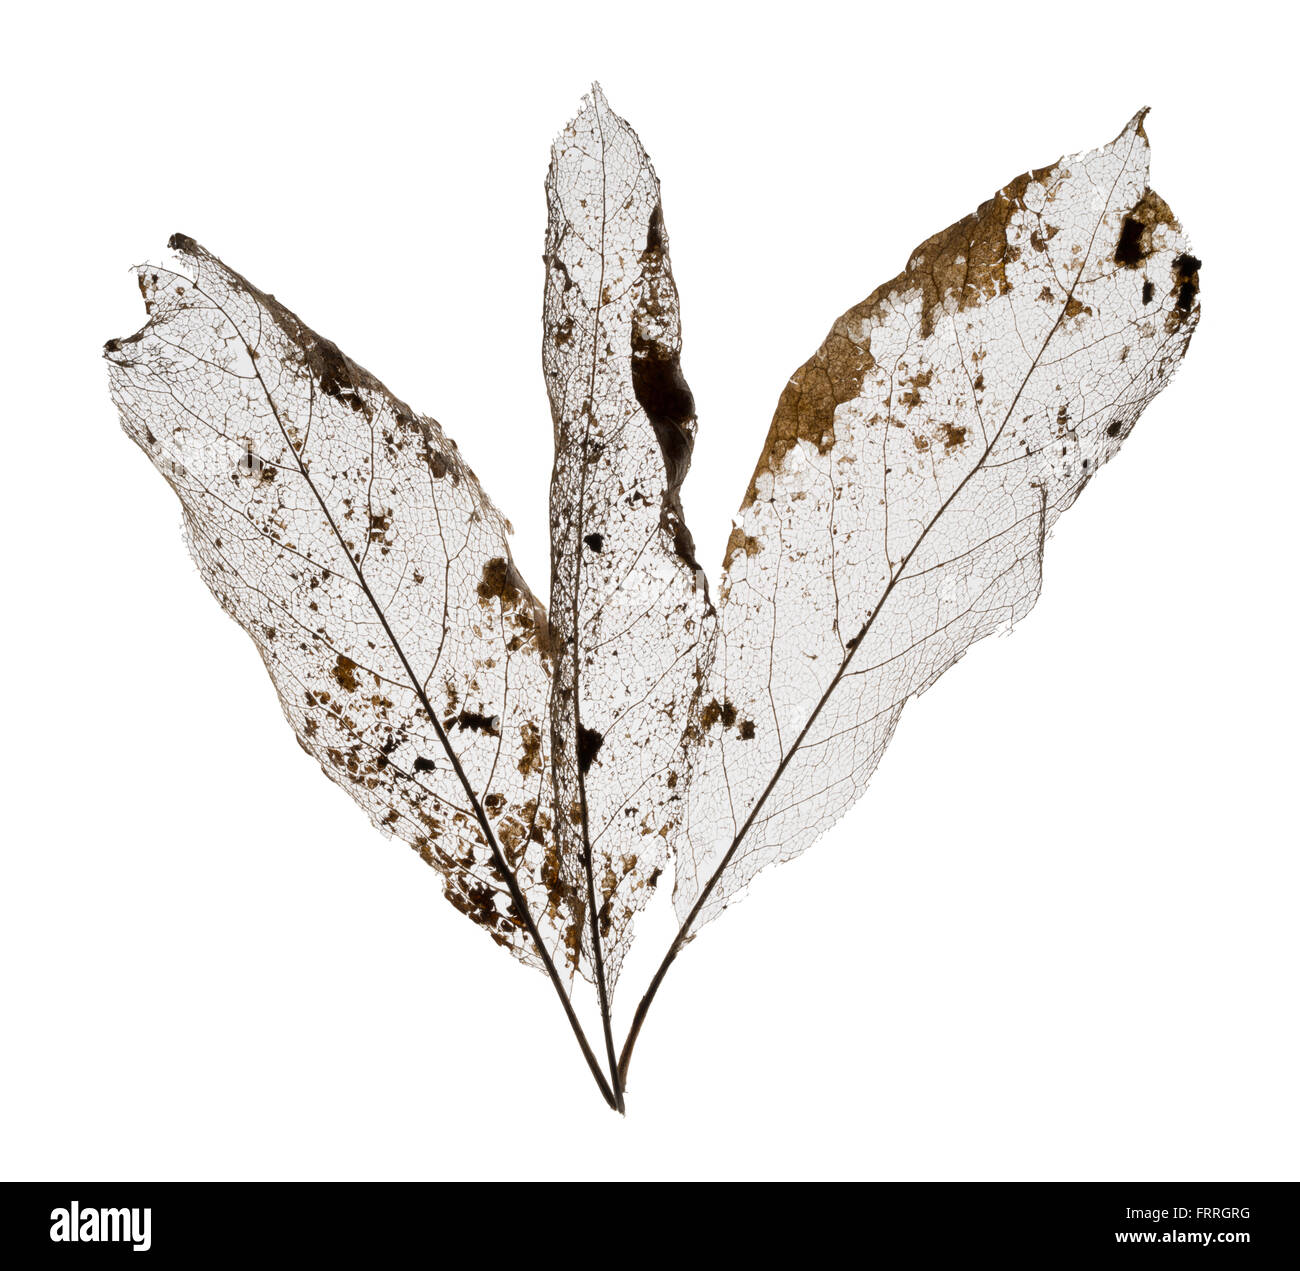 Leaf skeletons. Veins in decayed deciduous leaves. Stock Photo